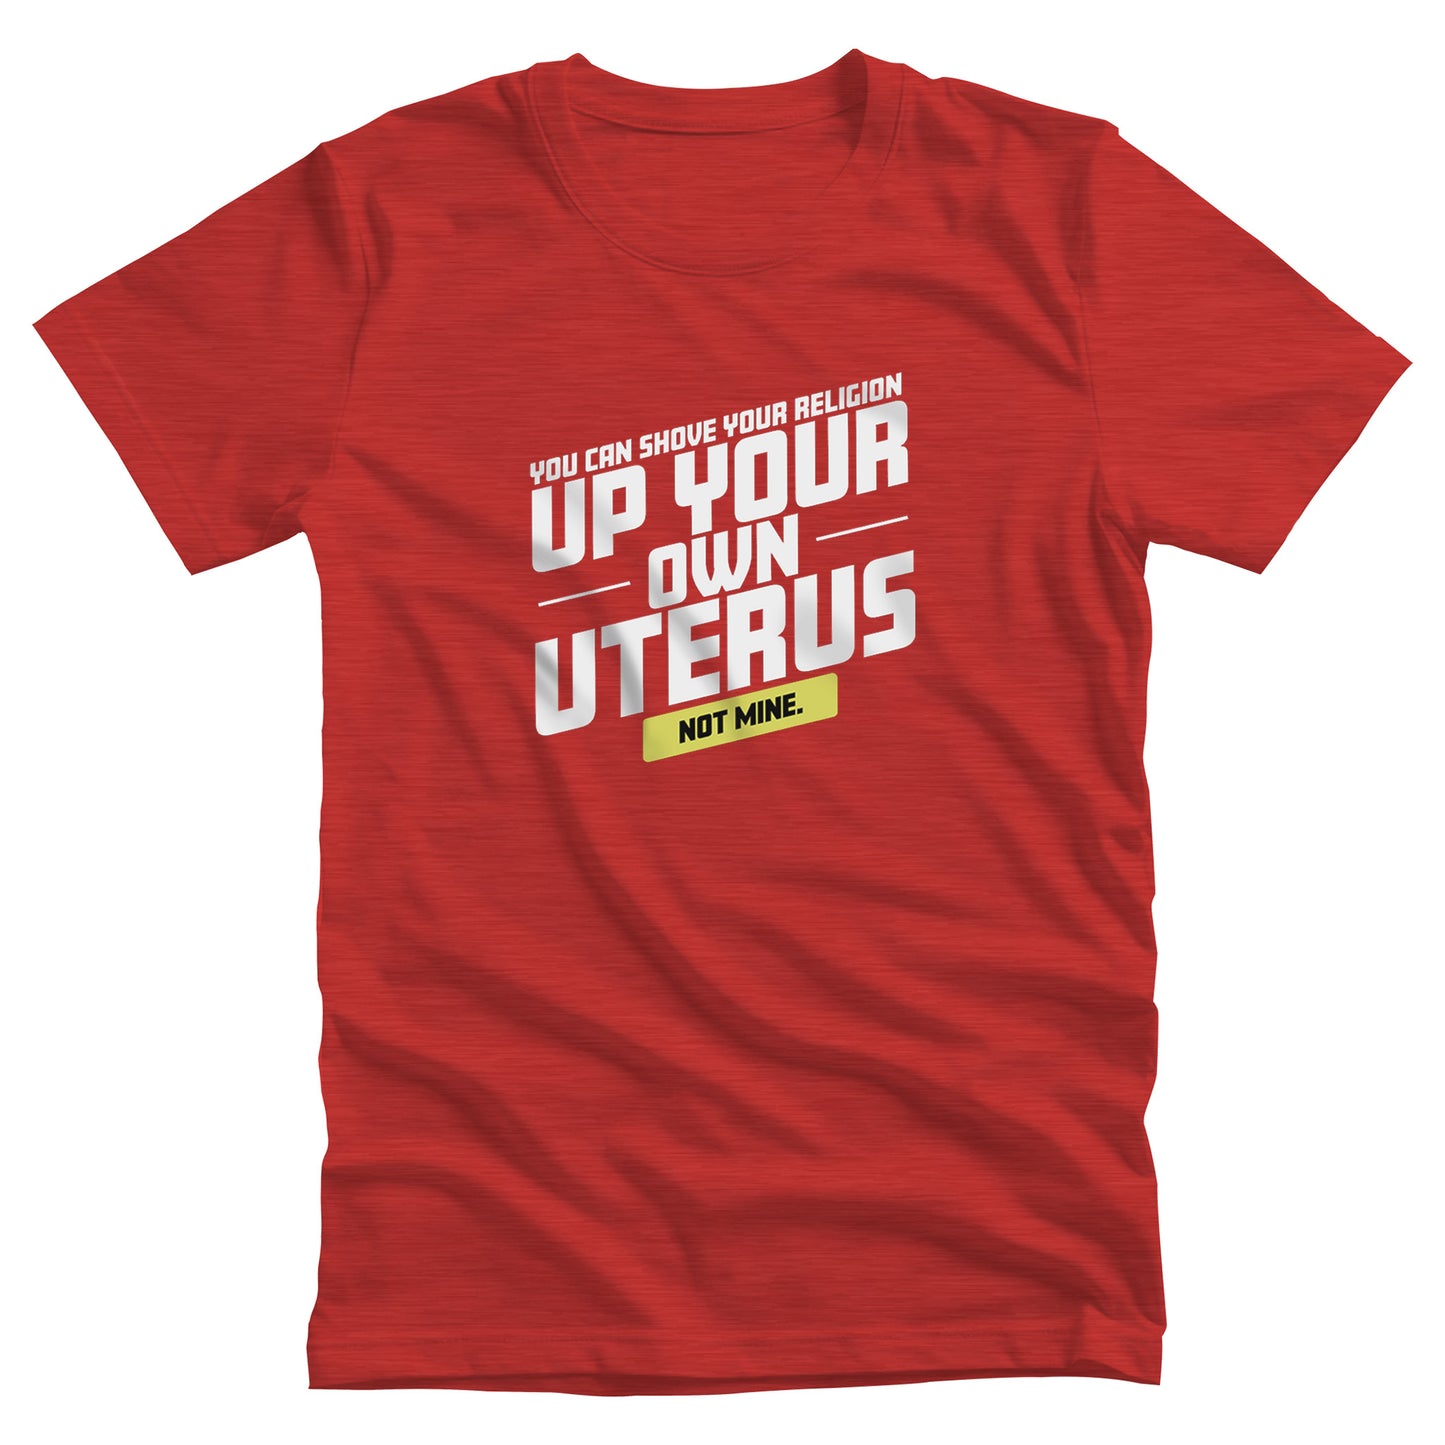 Heather Red color unisex t-shirt that says, “You Can Shove Your Religion Up Your Own Uterus, Not Mine.” The text is all slanted upwards, and the words “Not Mine” are in a yellow rectangle. 